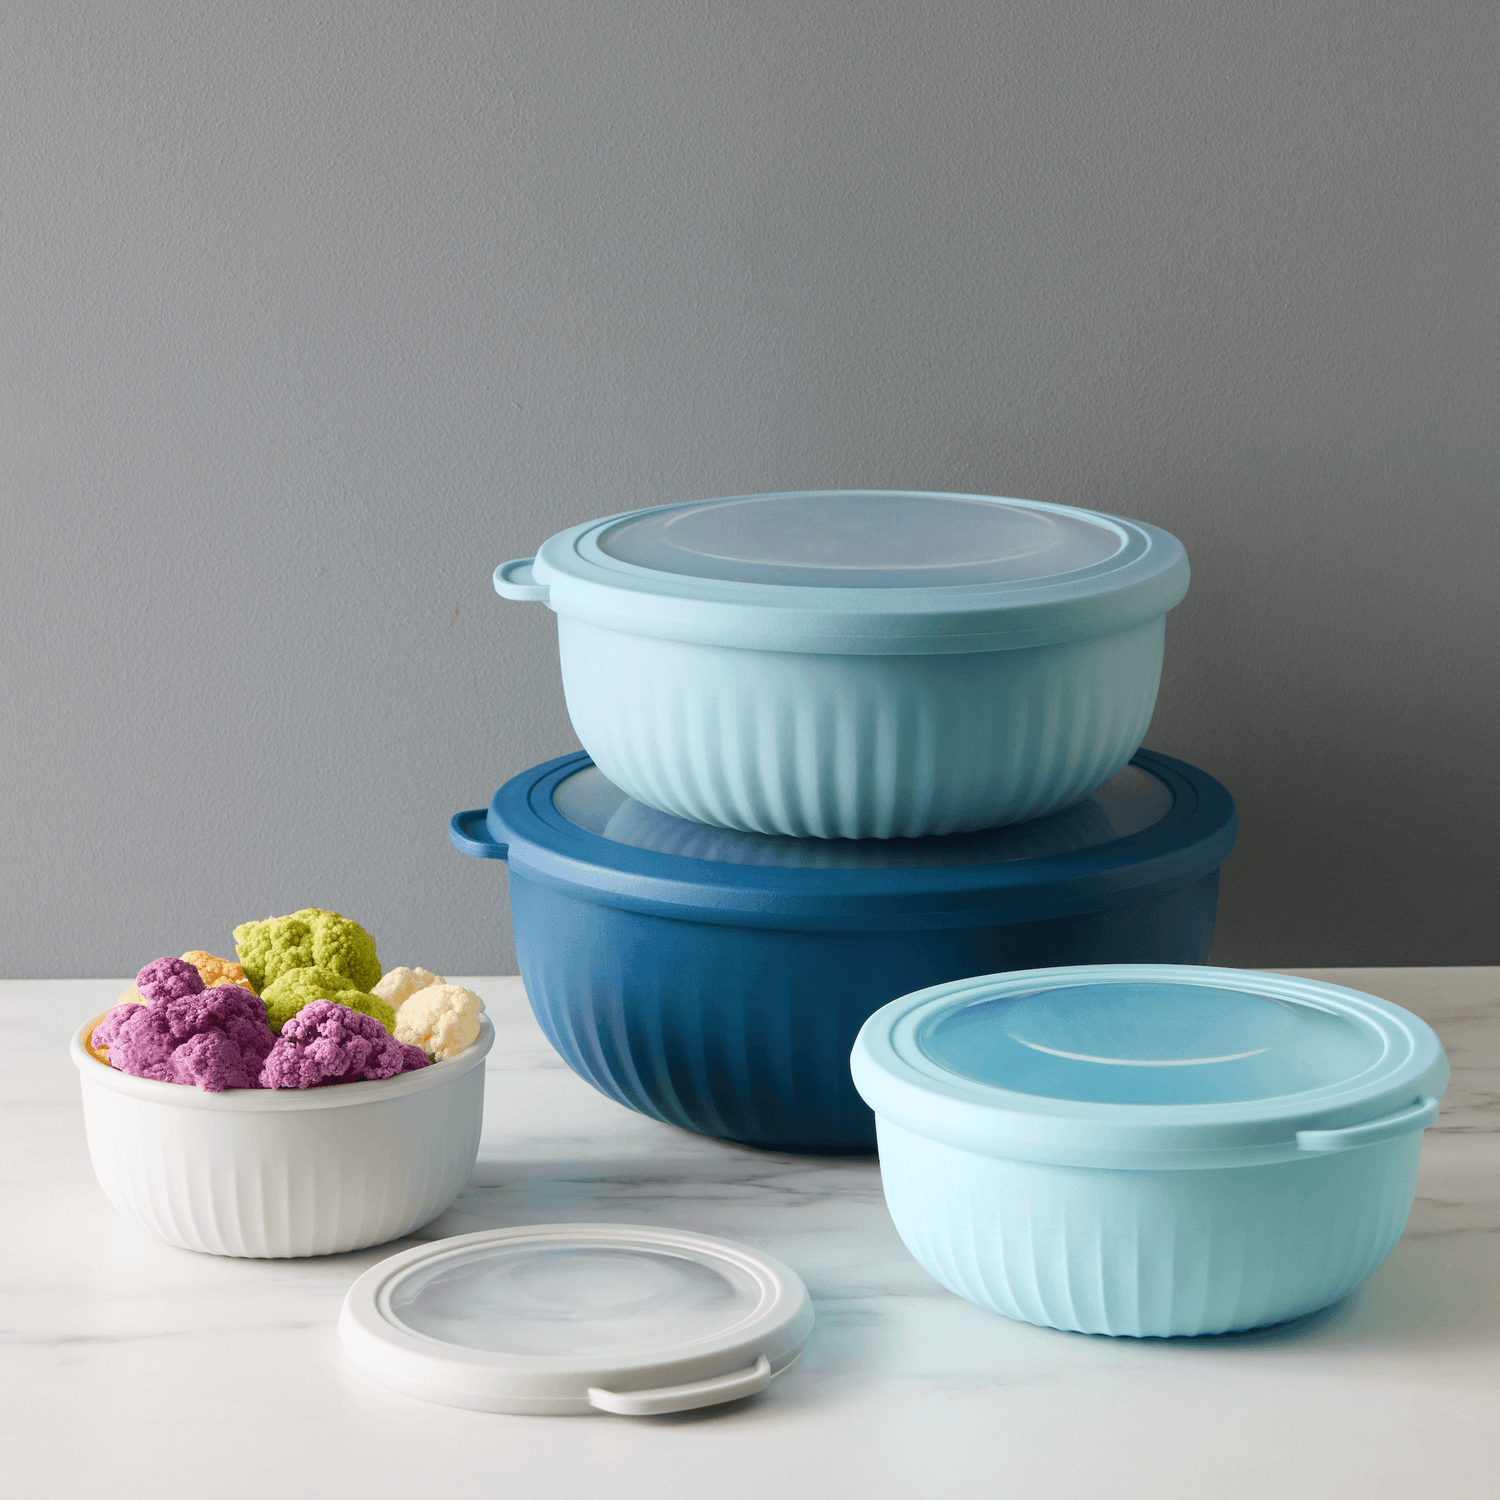 DOWAN Ceramic Bowl Set with Lids, Serving Bowls with Lids, Food Storage  Container, Porcelain Prep Bowl, Small Mixing Bowls for Kitchen, Microwave 